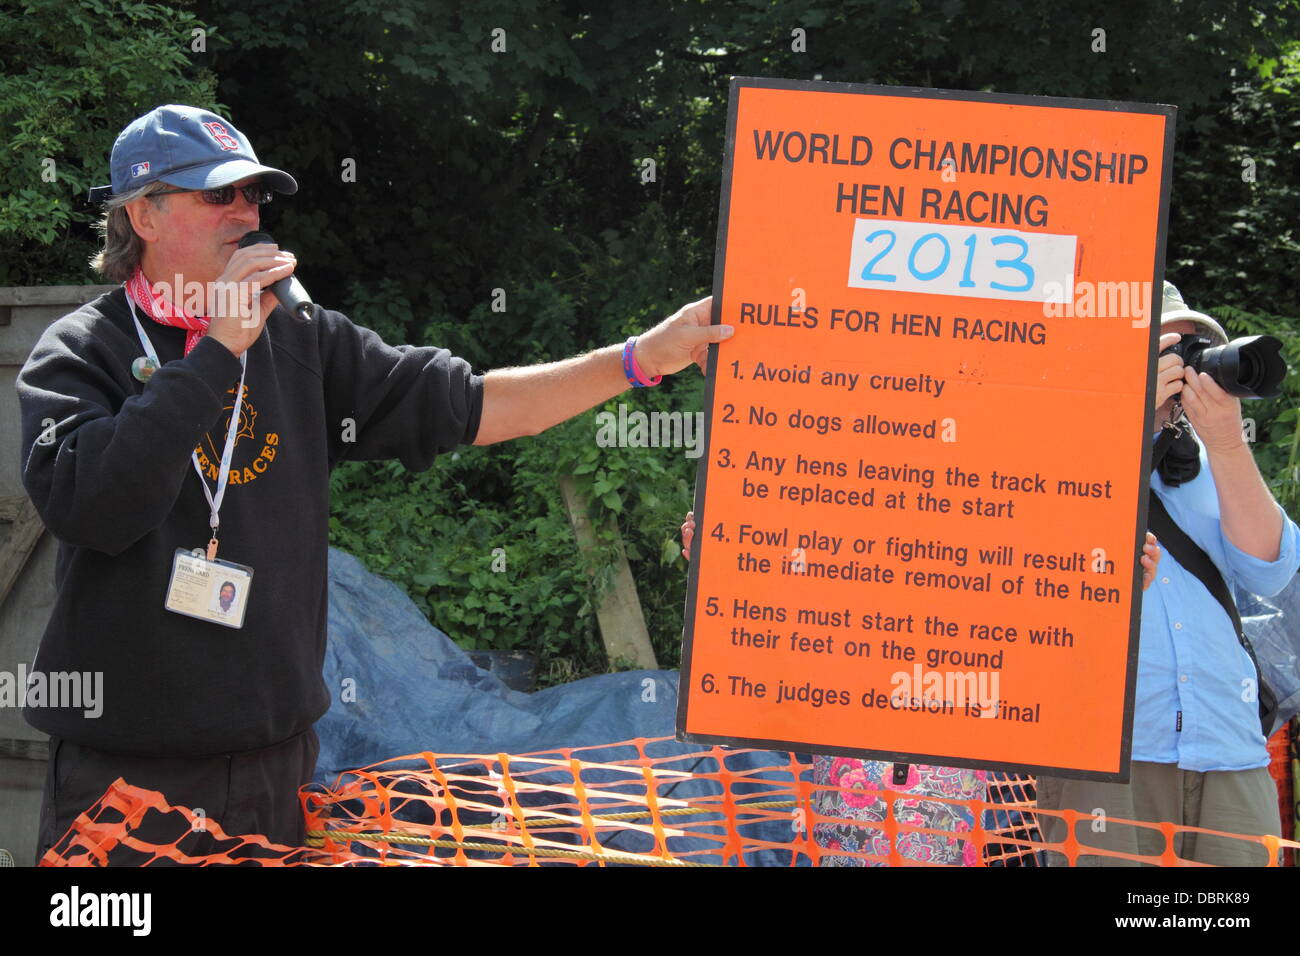 Bonsall, Derbyshire, UK. 3 August 2013. The Hen Racing World Championships take plaace in Bonsall. A race official outlines World Championship Hen Racing rules including  'no fowl play'.  Once underway, entrants are not allowed to touch their hens but some opt to coax them to the finish line by clucking.  Among the more colourfully named 2013 entrants was Hendo Nagasaki named after the 1970’s masked British wrestler. Credit:  Deborah Vernon/Alamy Live News Stock Photo